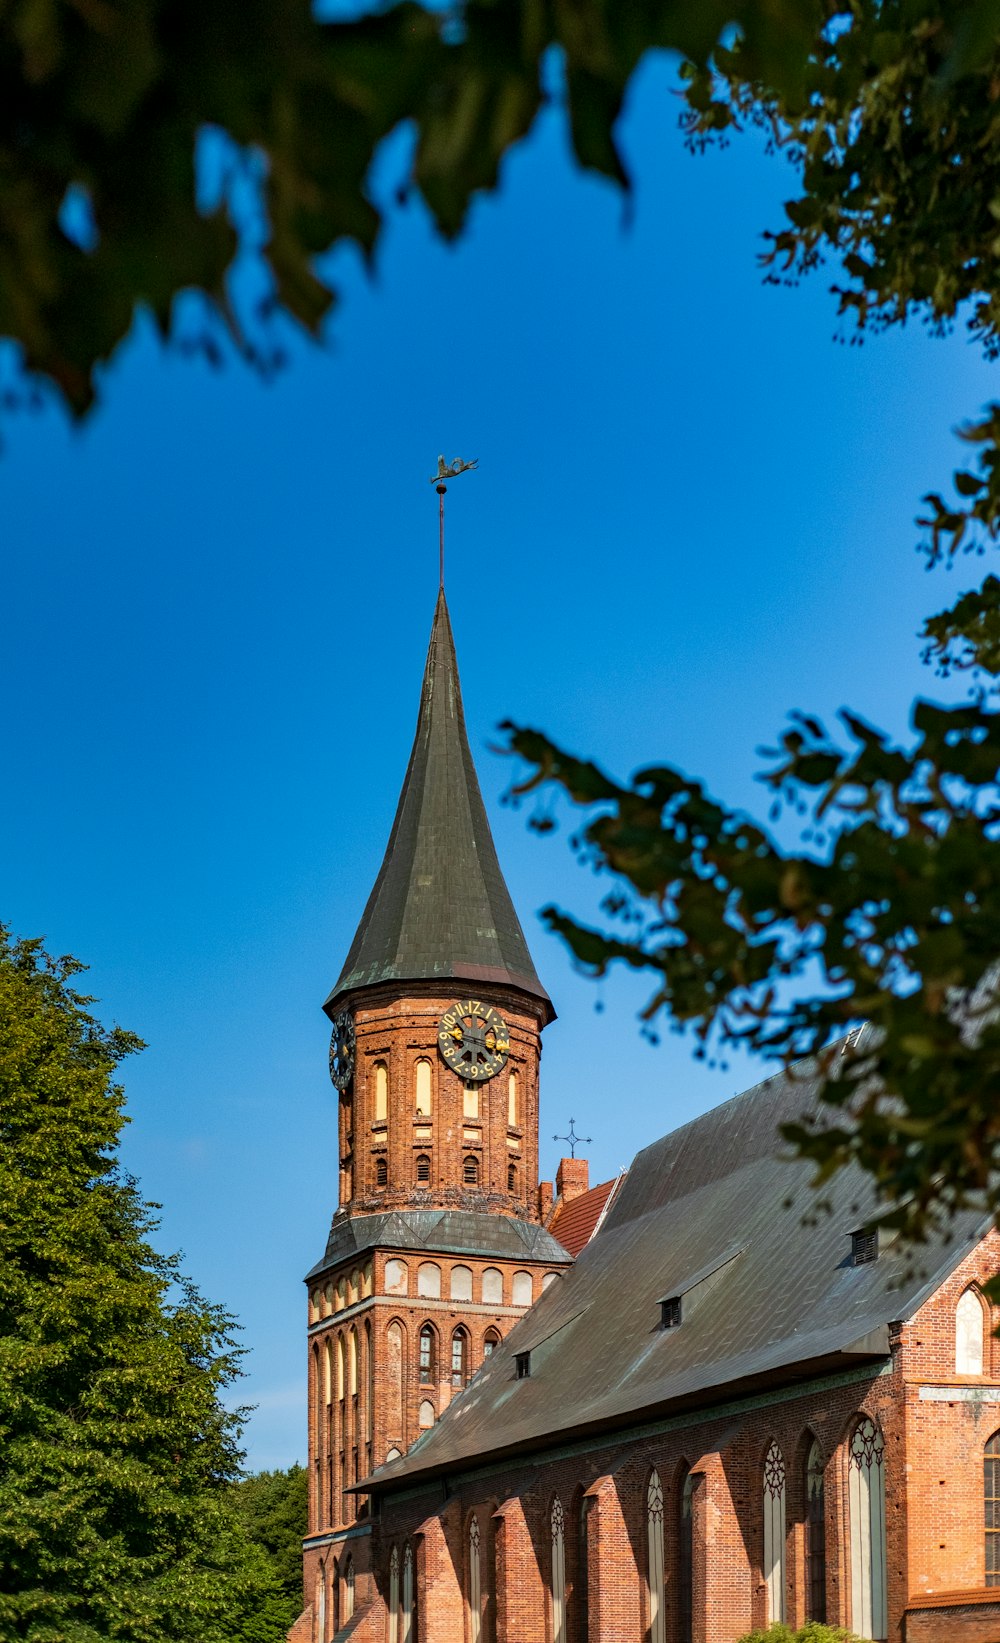 an old church with a clock tower in the background